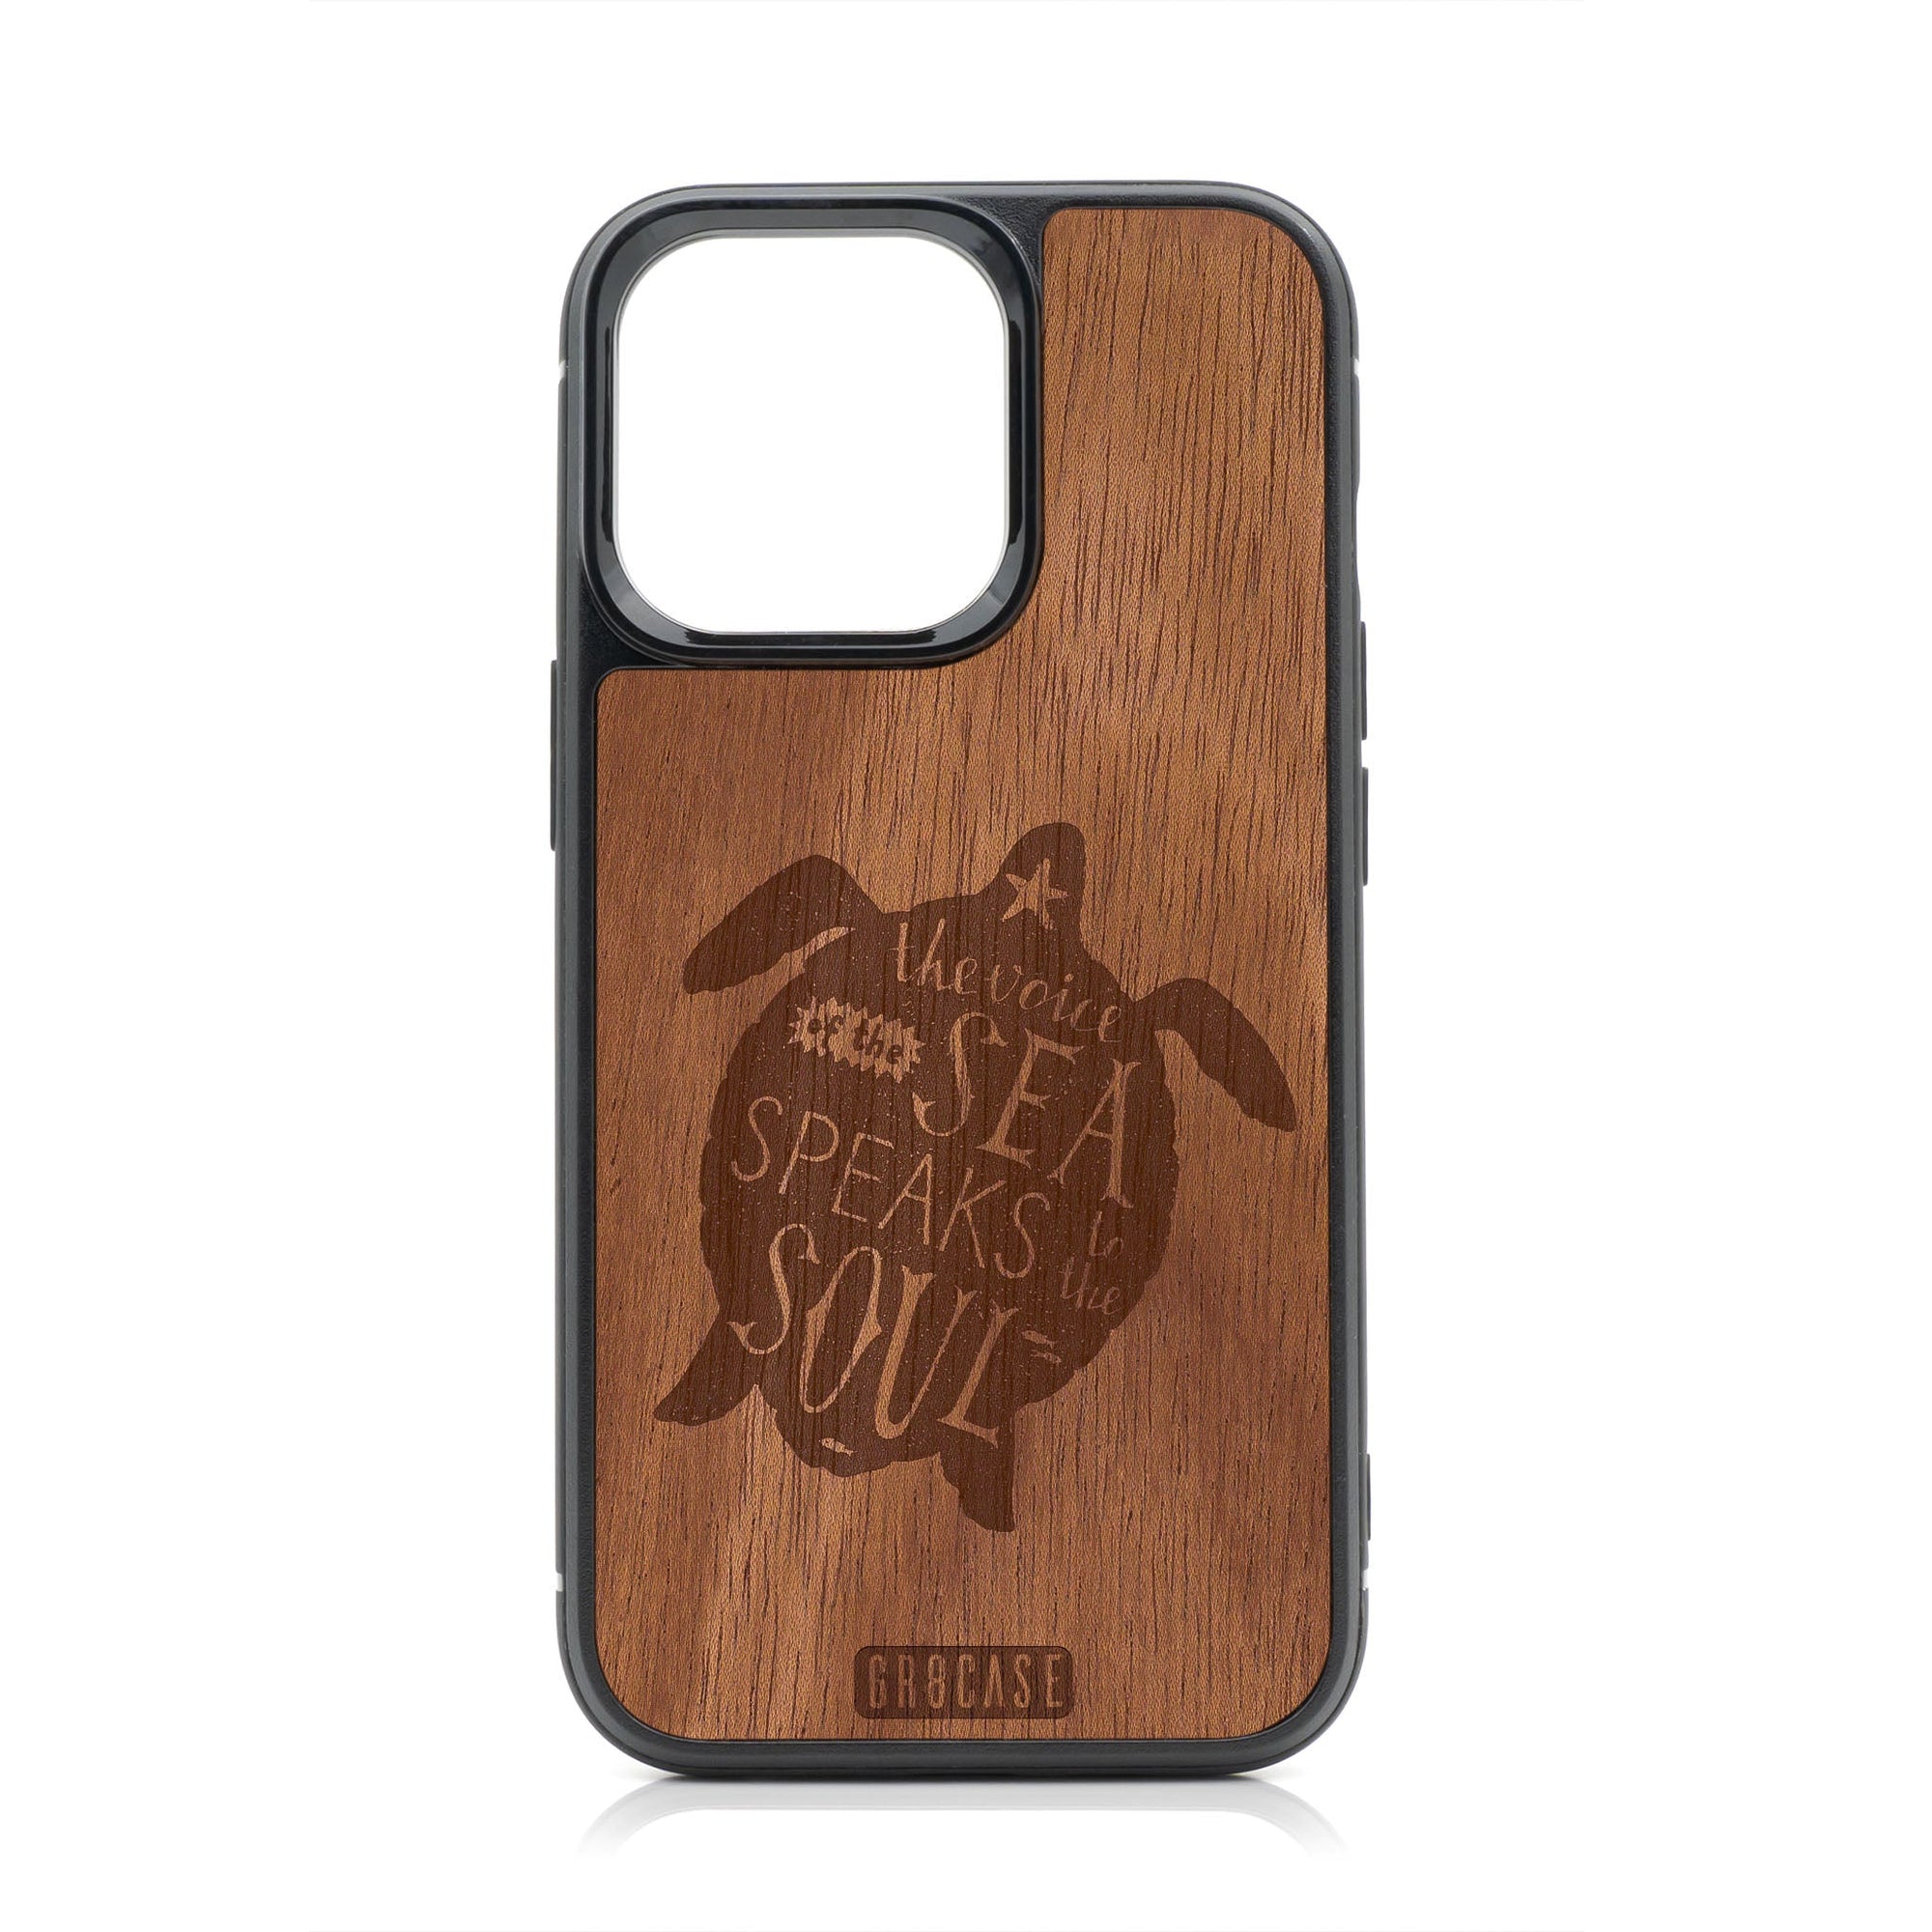 The Voice Of The Sea Speaks To The Soul (Turtle) Design Wood Case For iPhone 14 Pro